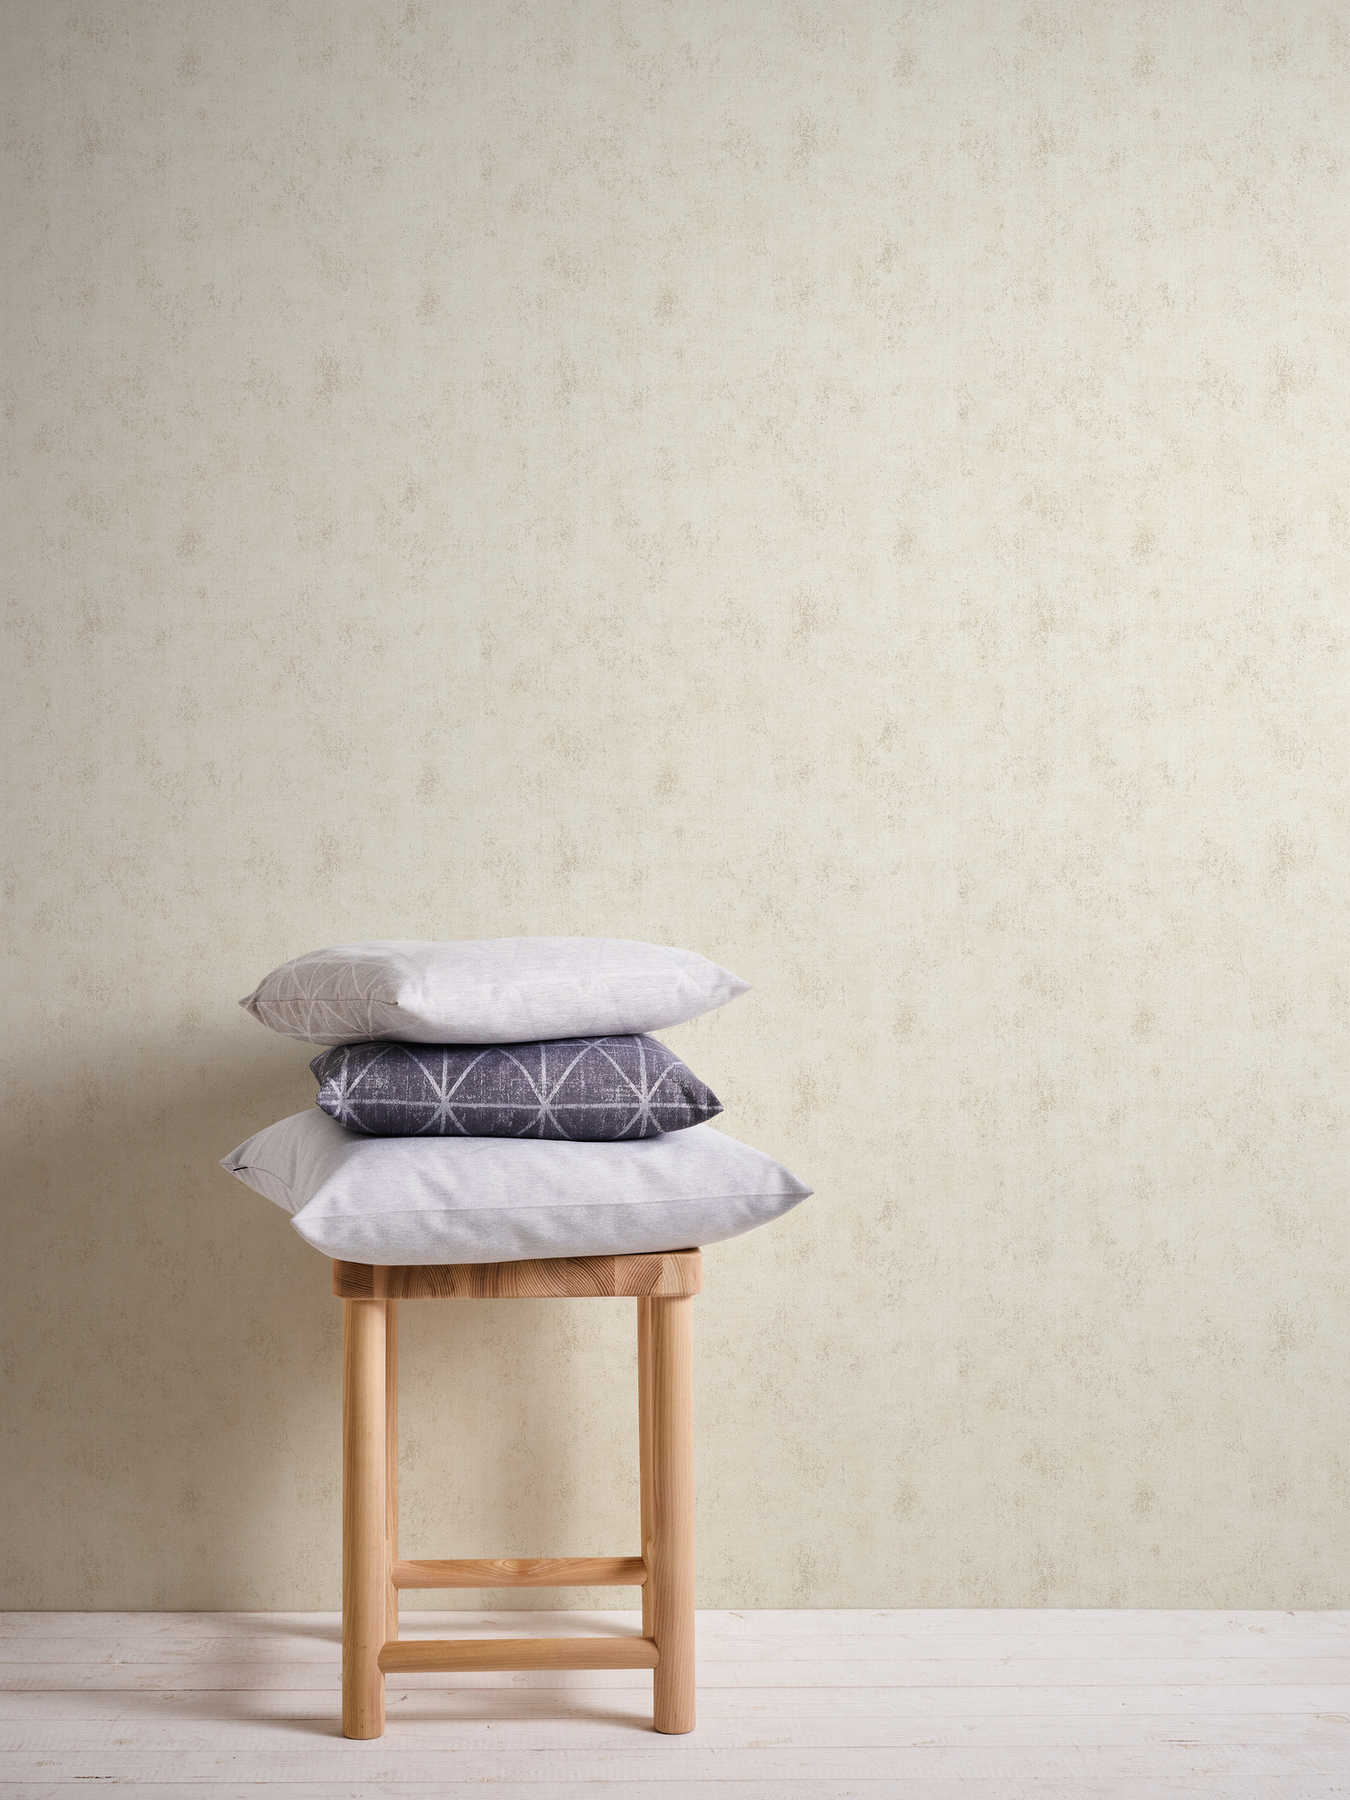             Wallpaper with discreet structure design - beige
        